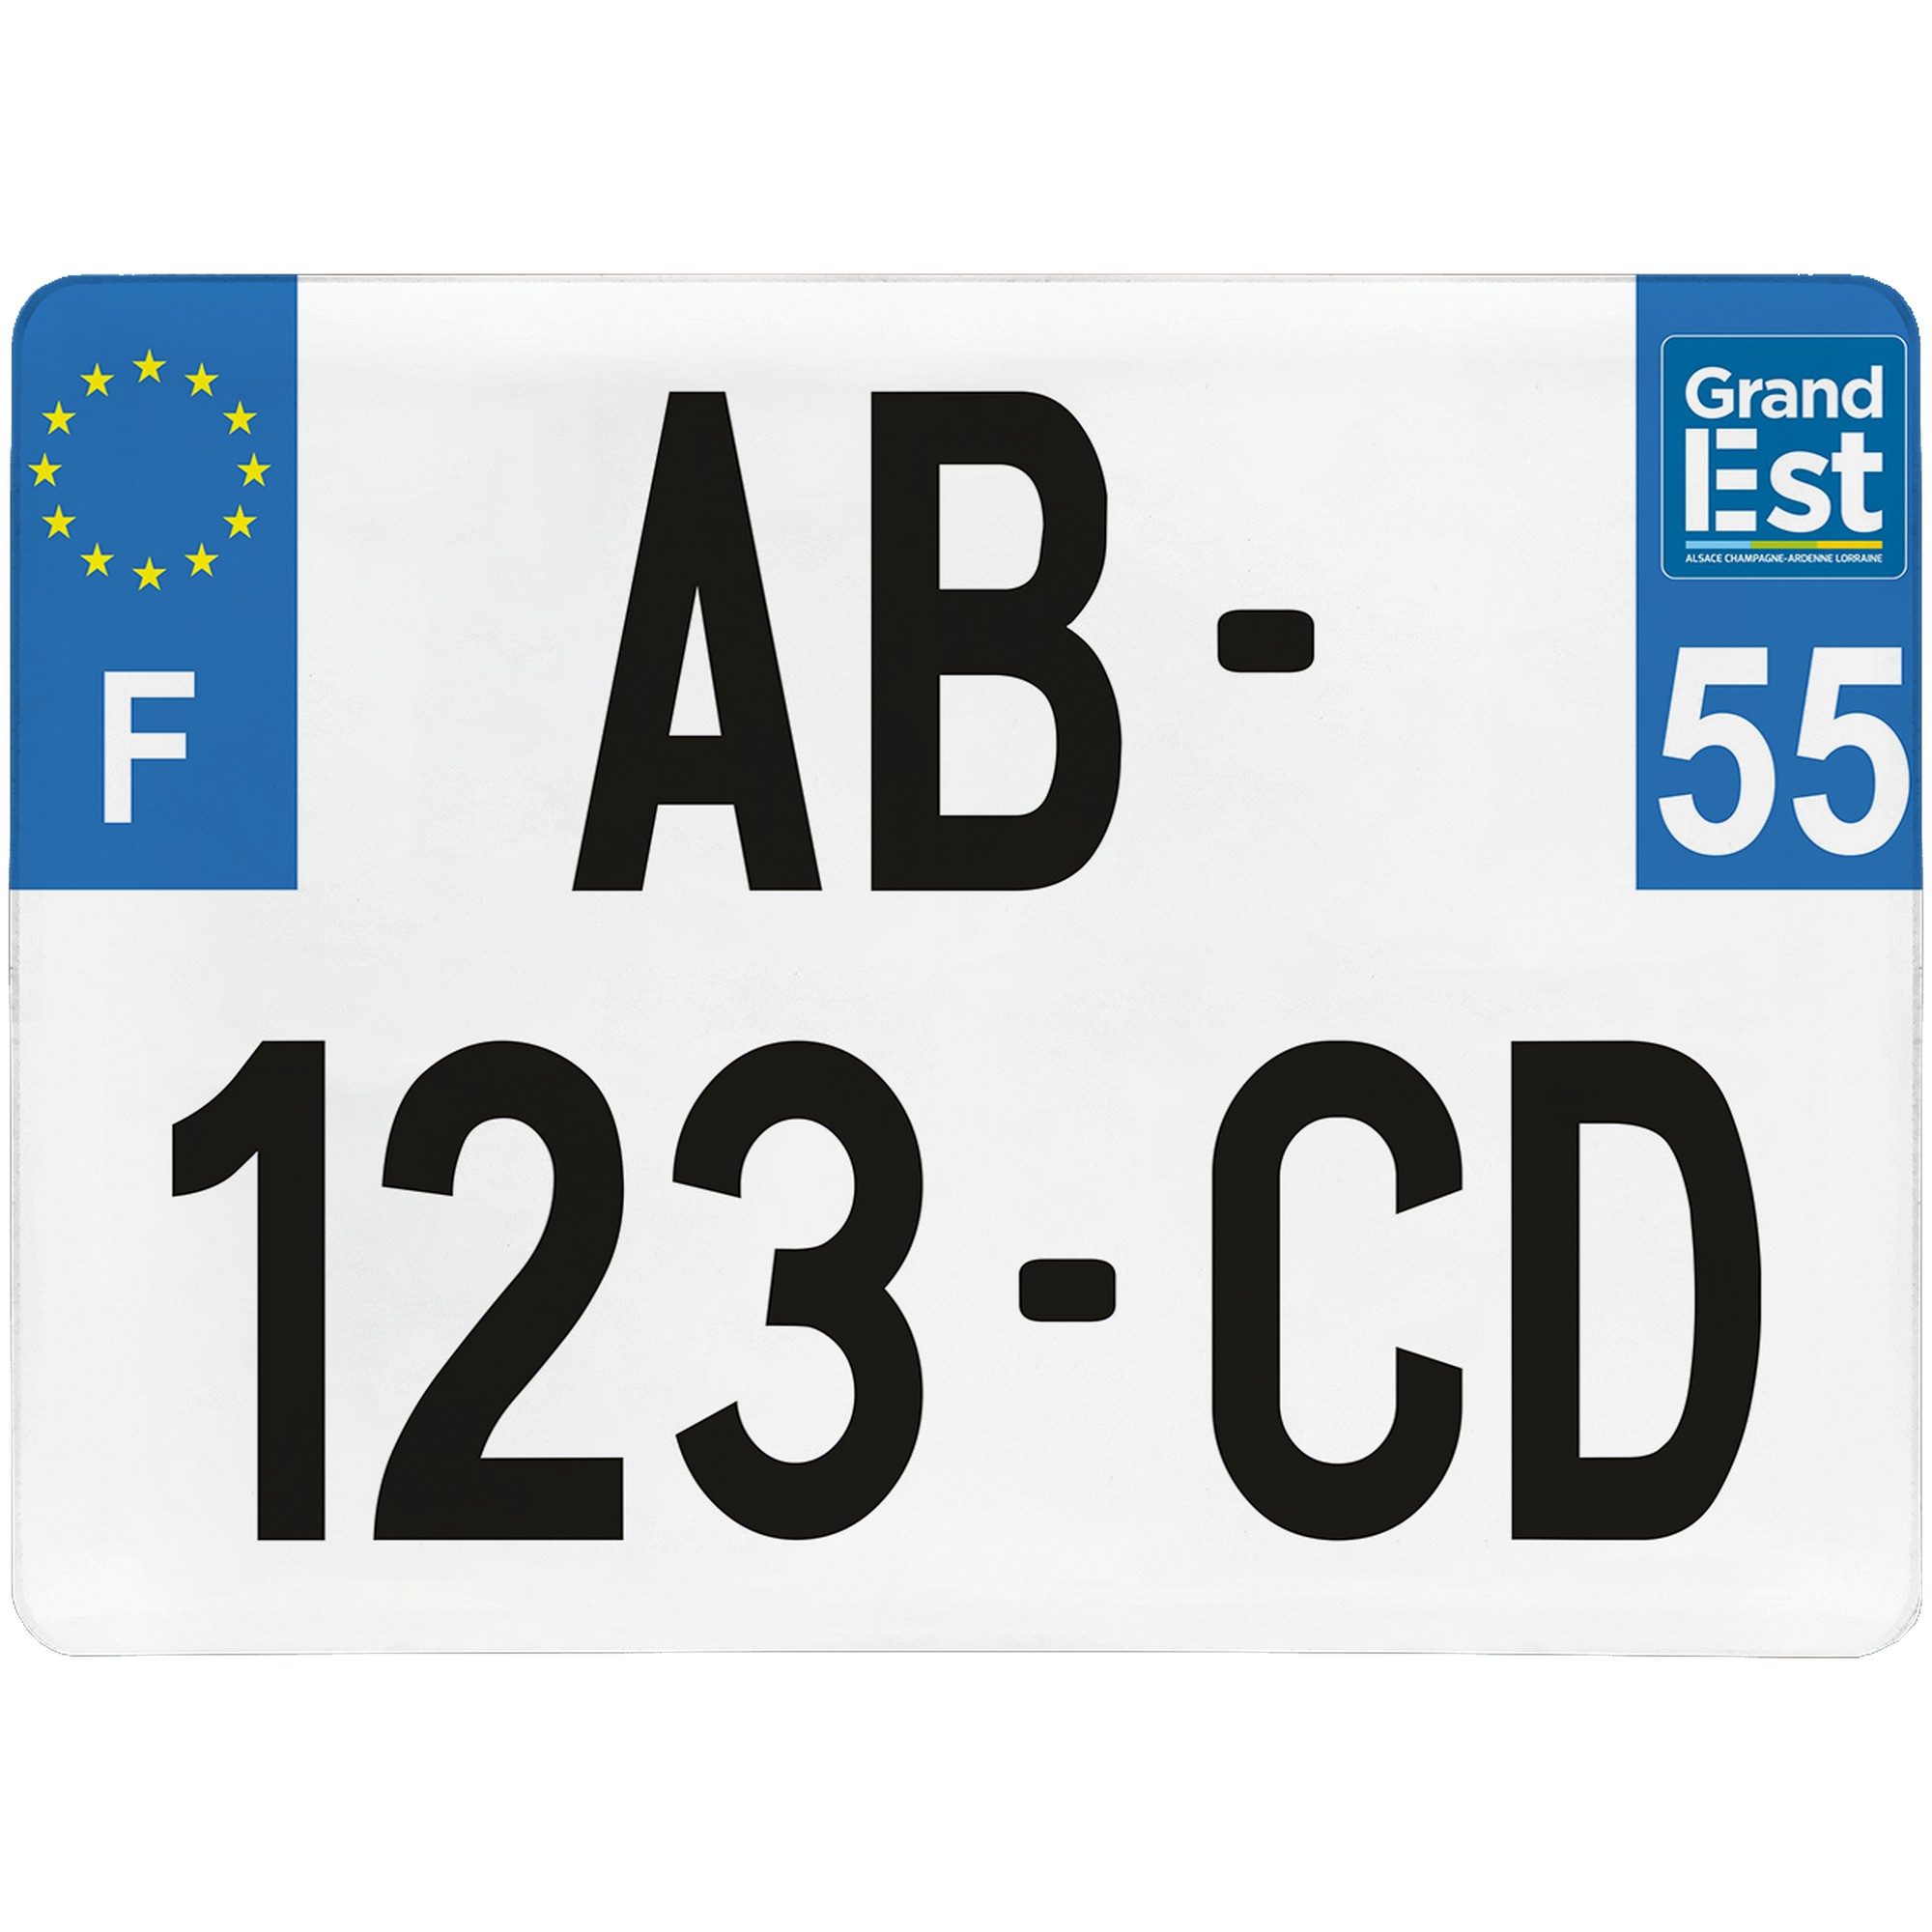 File:Plaque d'immatriculation AUTO 275x200.png - Wikimedia Commons